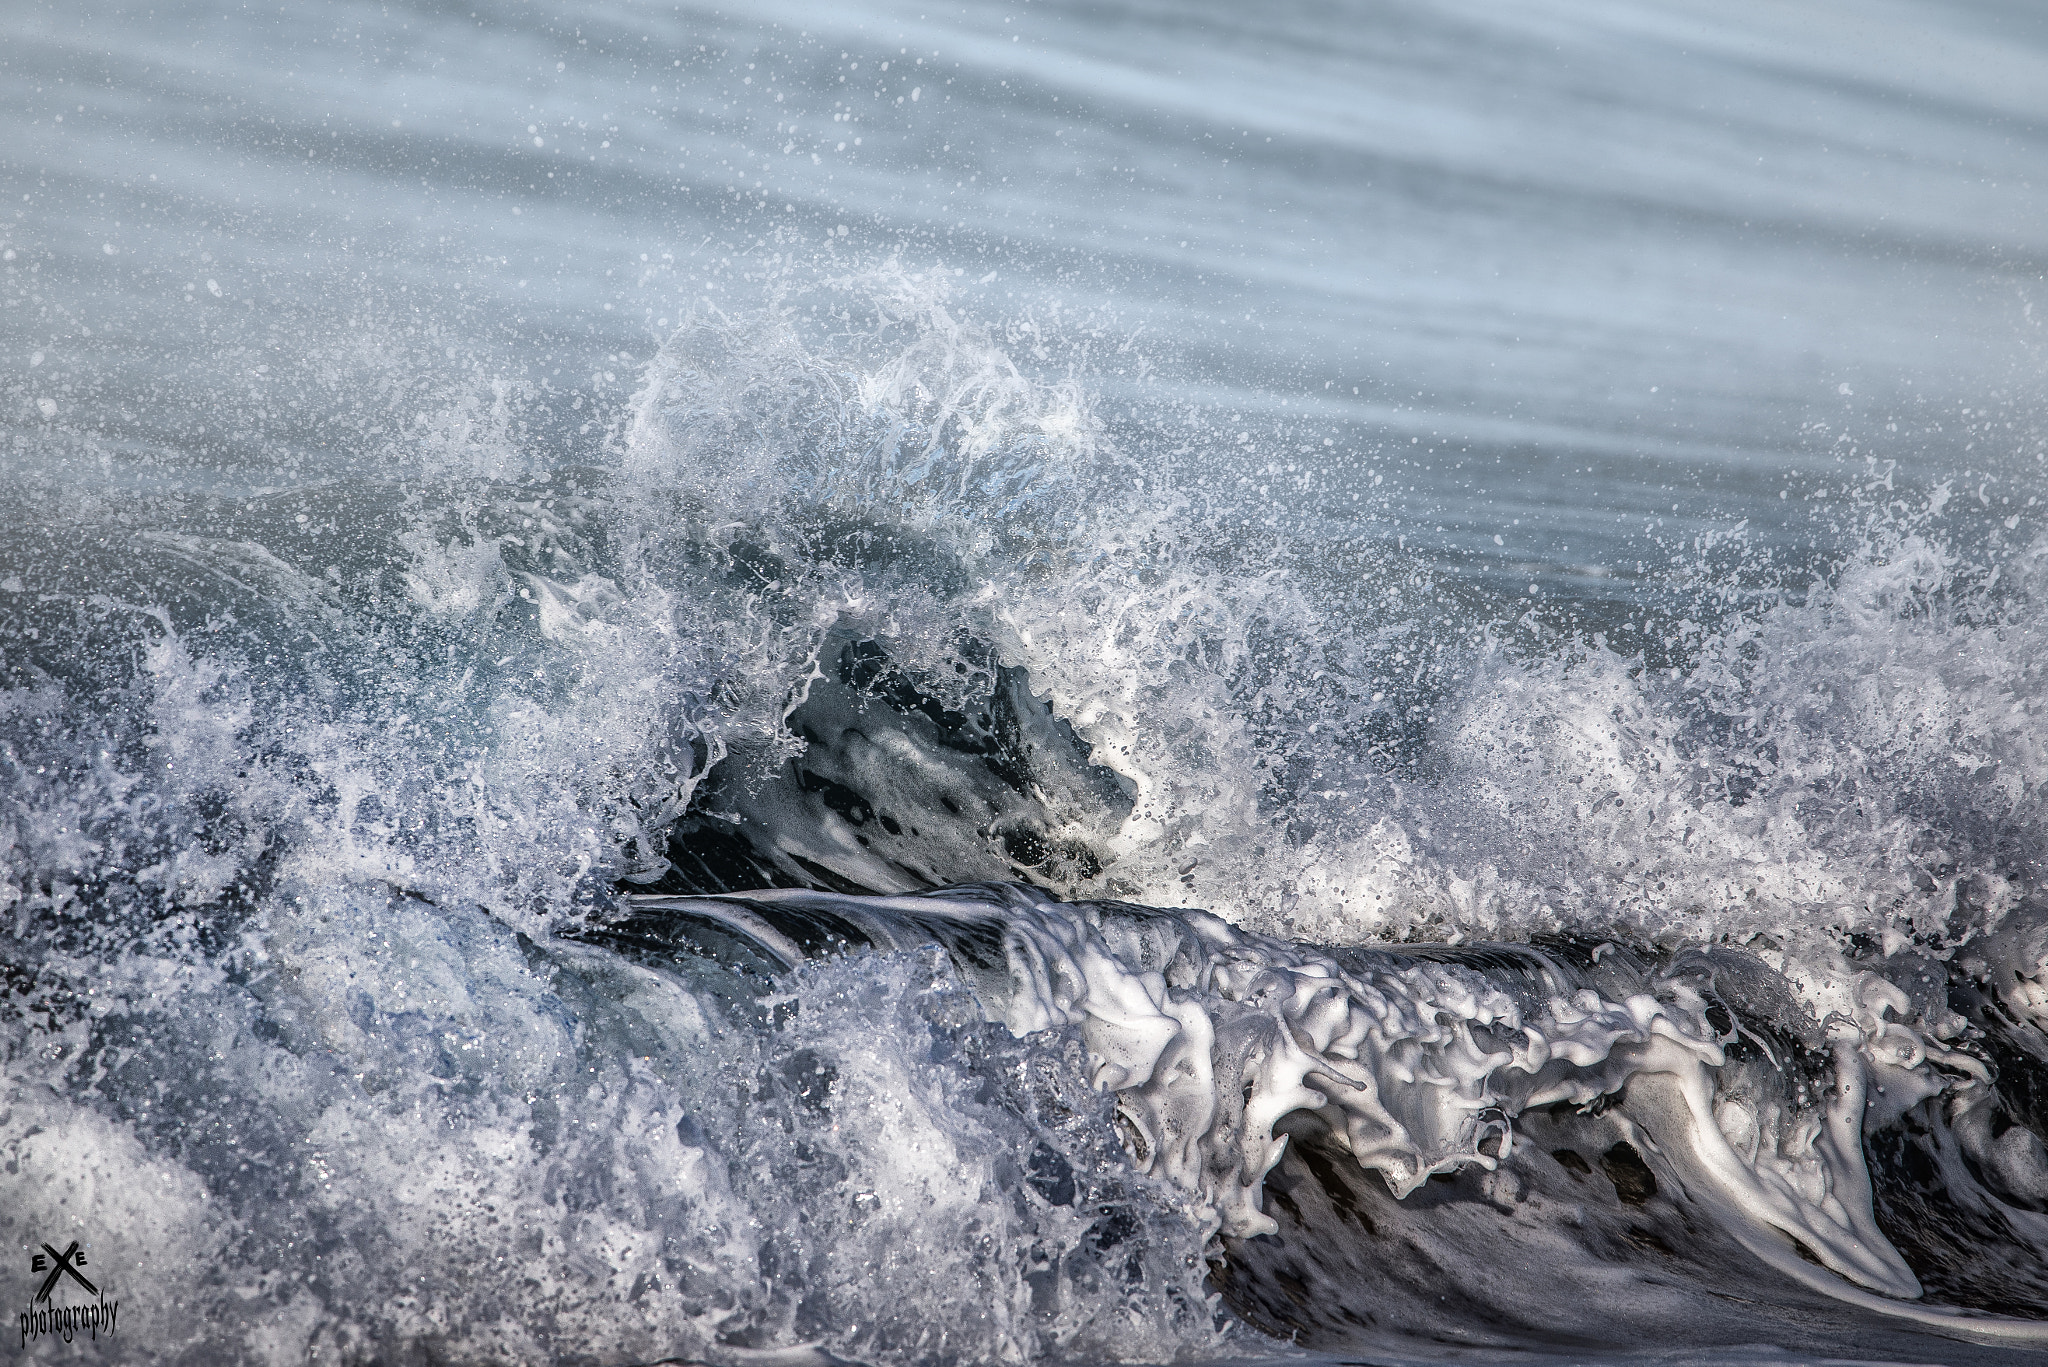 Nikon D610 + Sigma 150-600mm F5-6.3 DG OS HSM | C sample photo. Textures in the waves photography